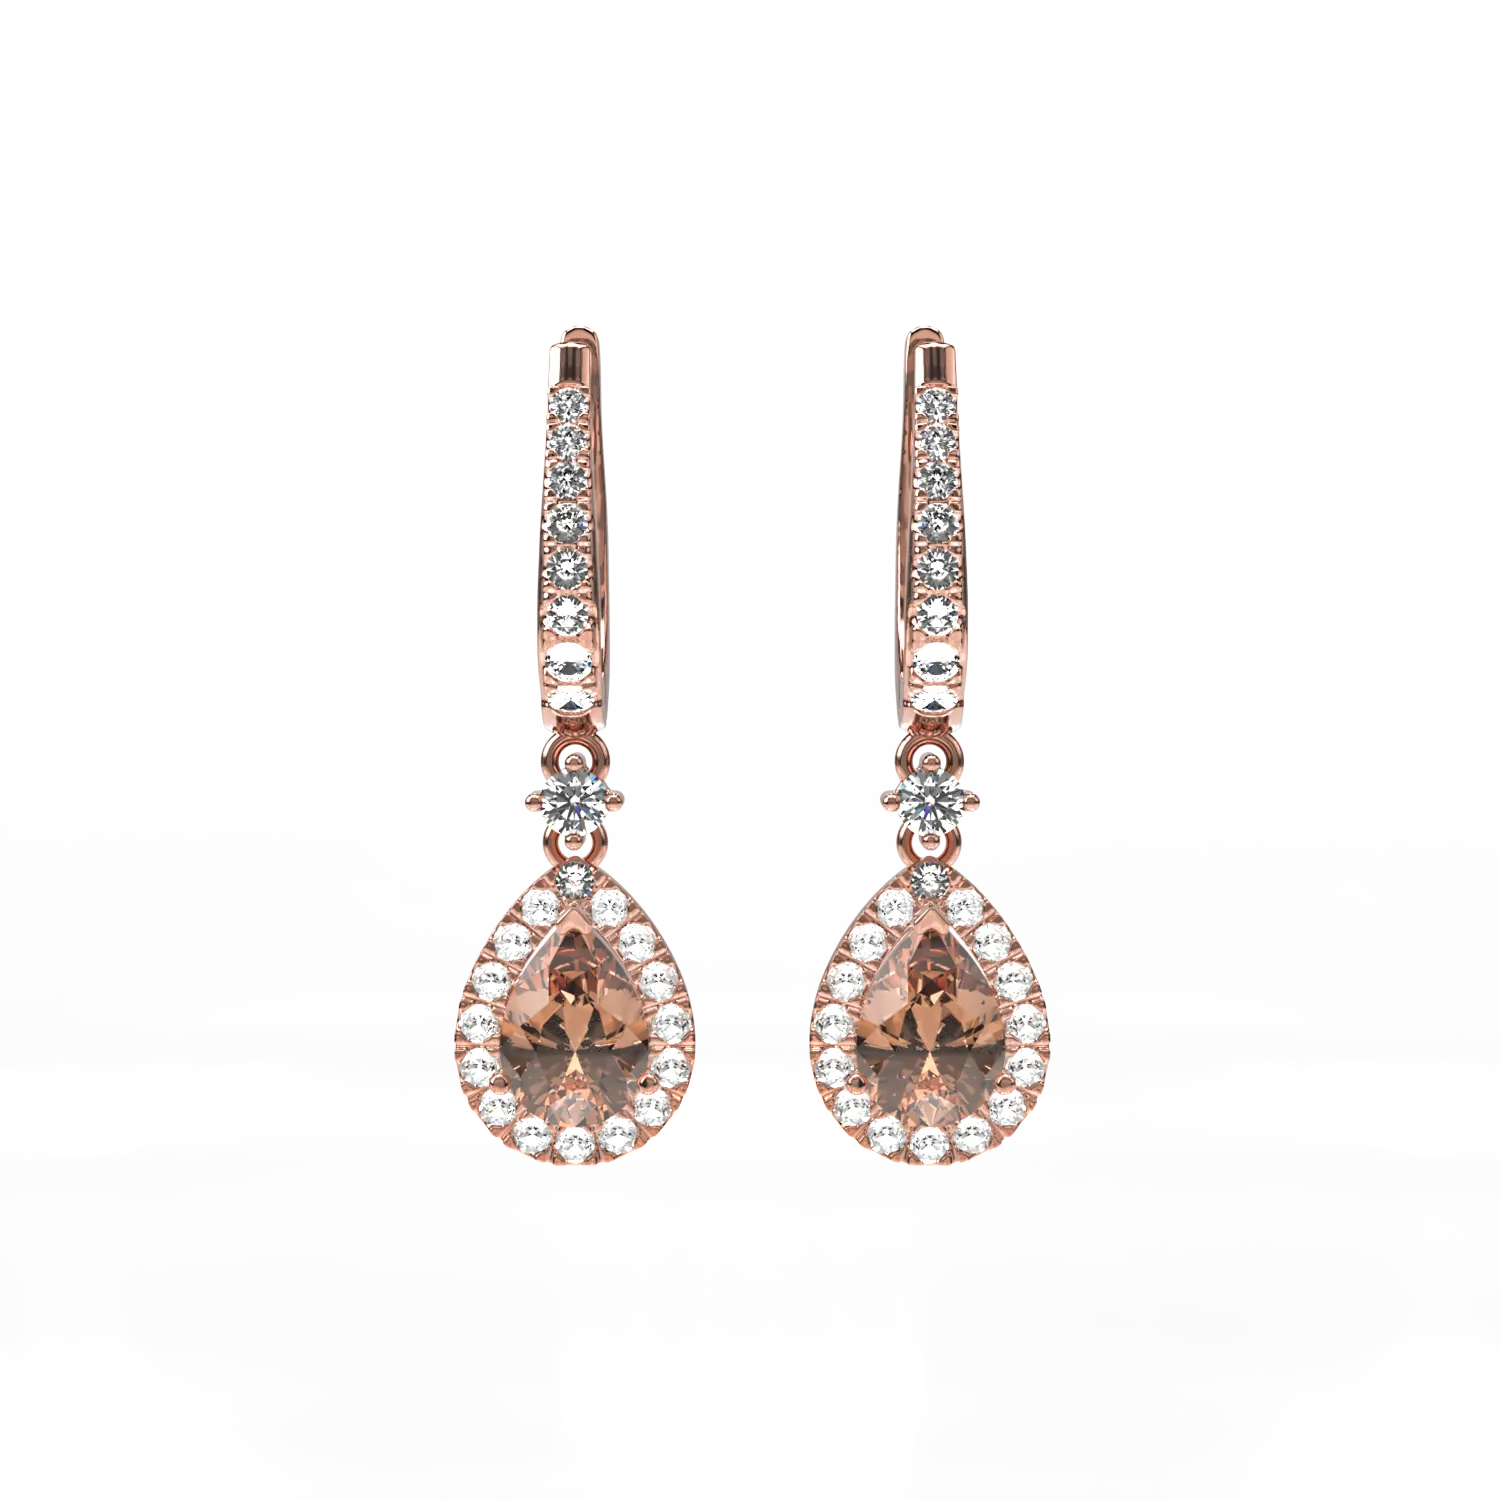 18K rose gold earrings with 1.39ct brown diamonds and 0.44ct transparent diamonds